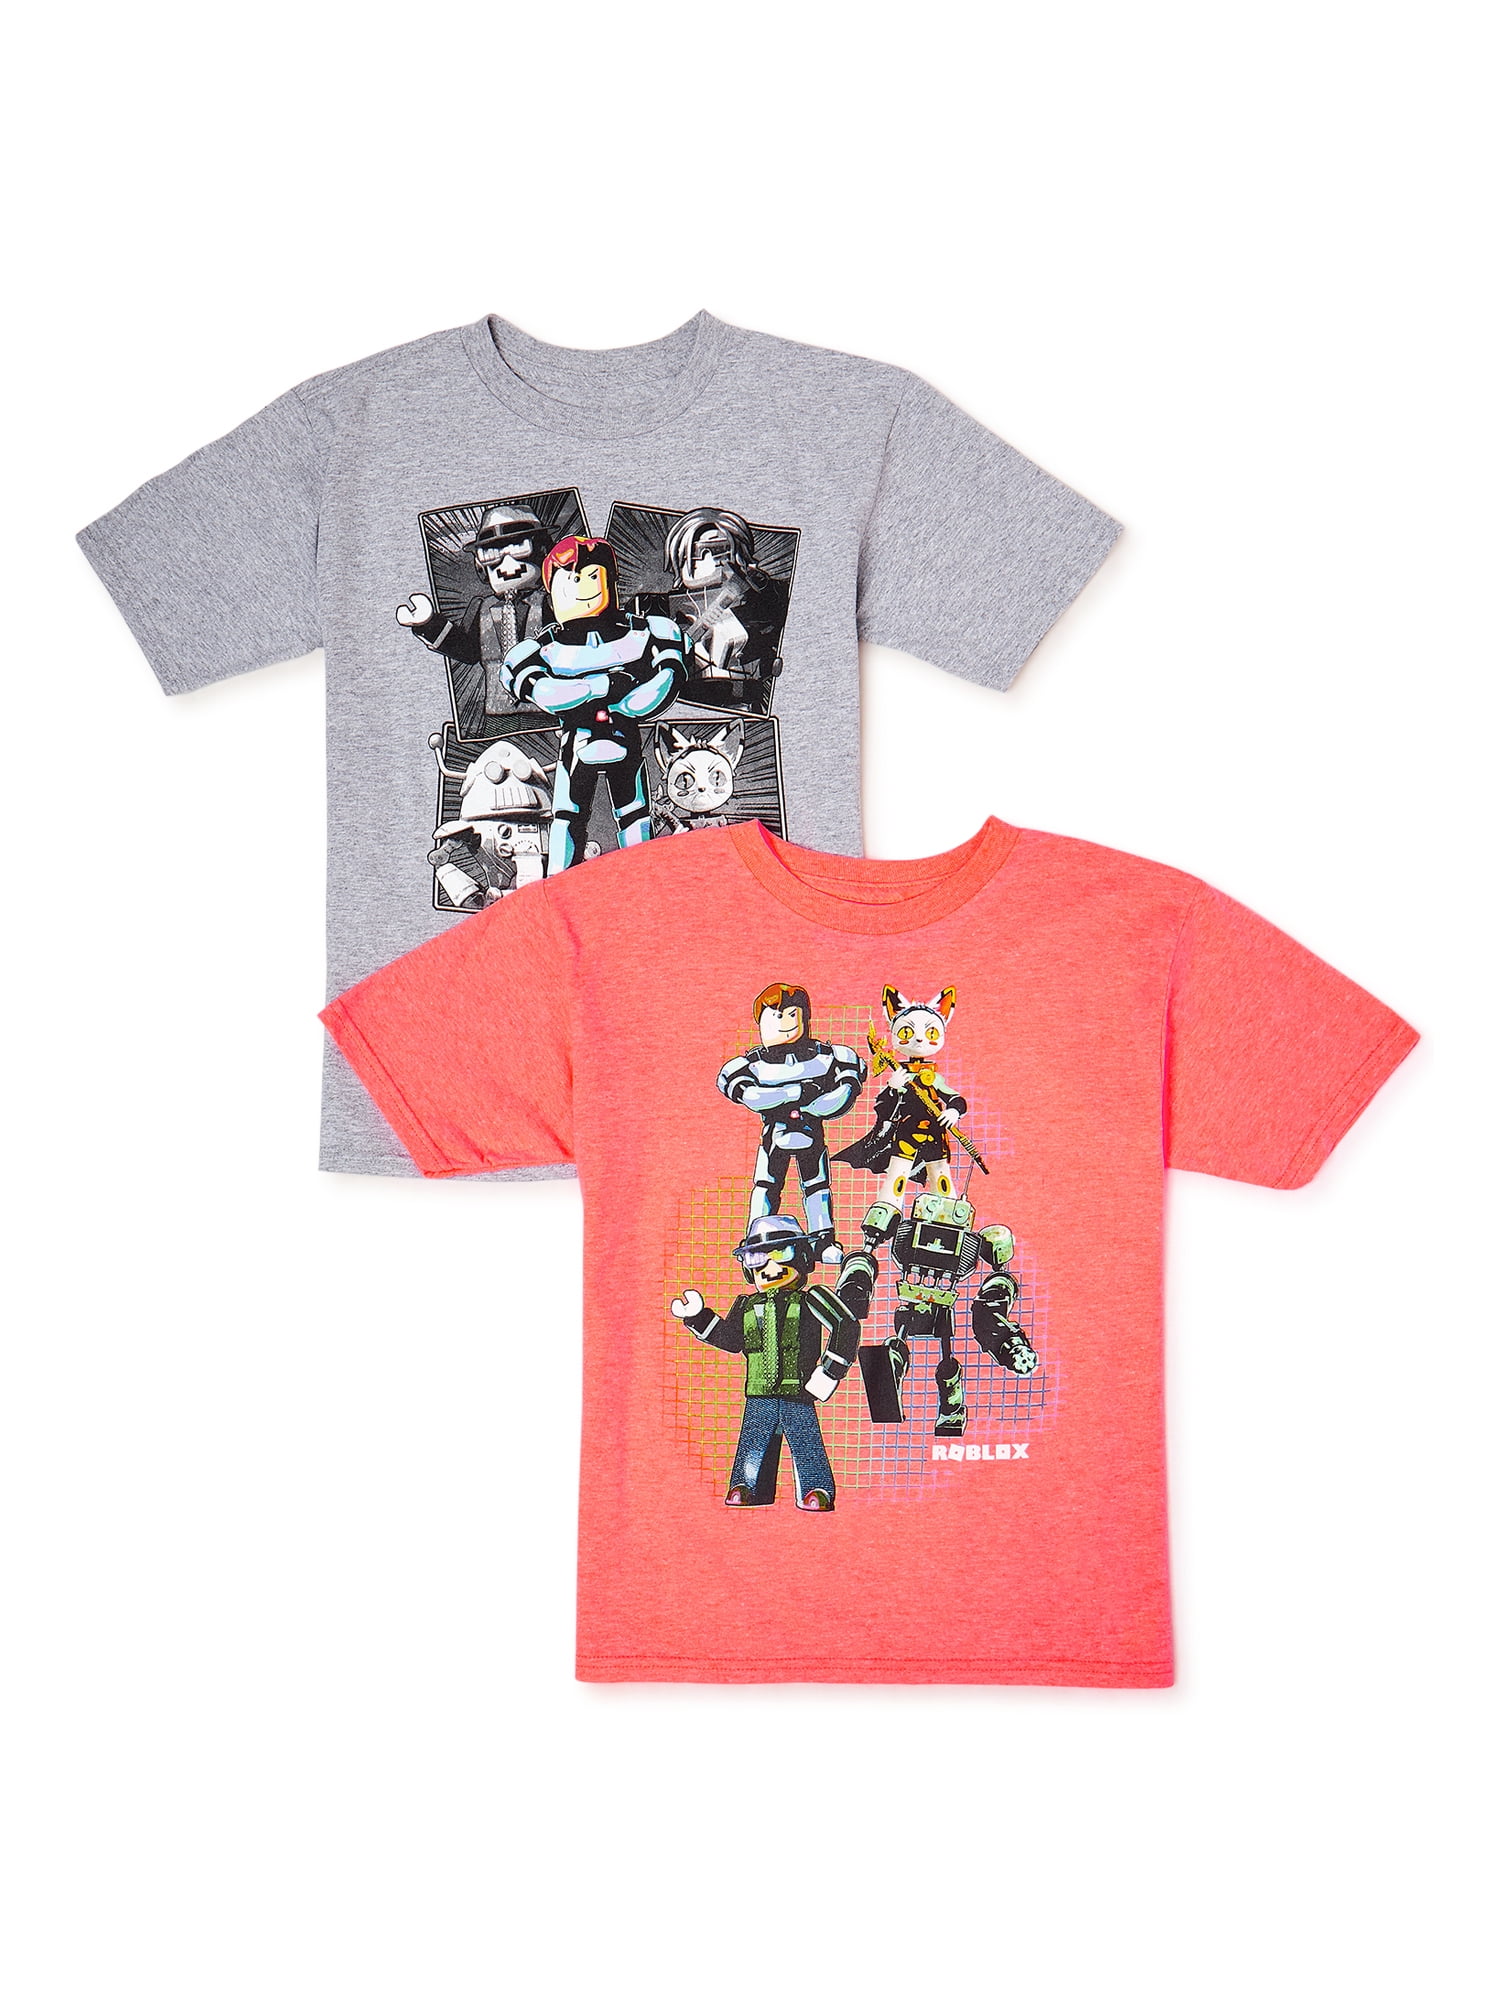 Roblox Down Tops & T-Shirts for Boys Sizes (4+)